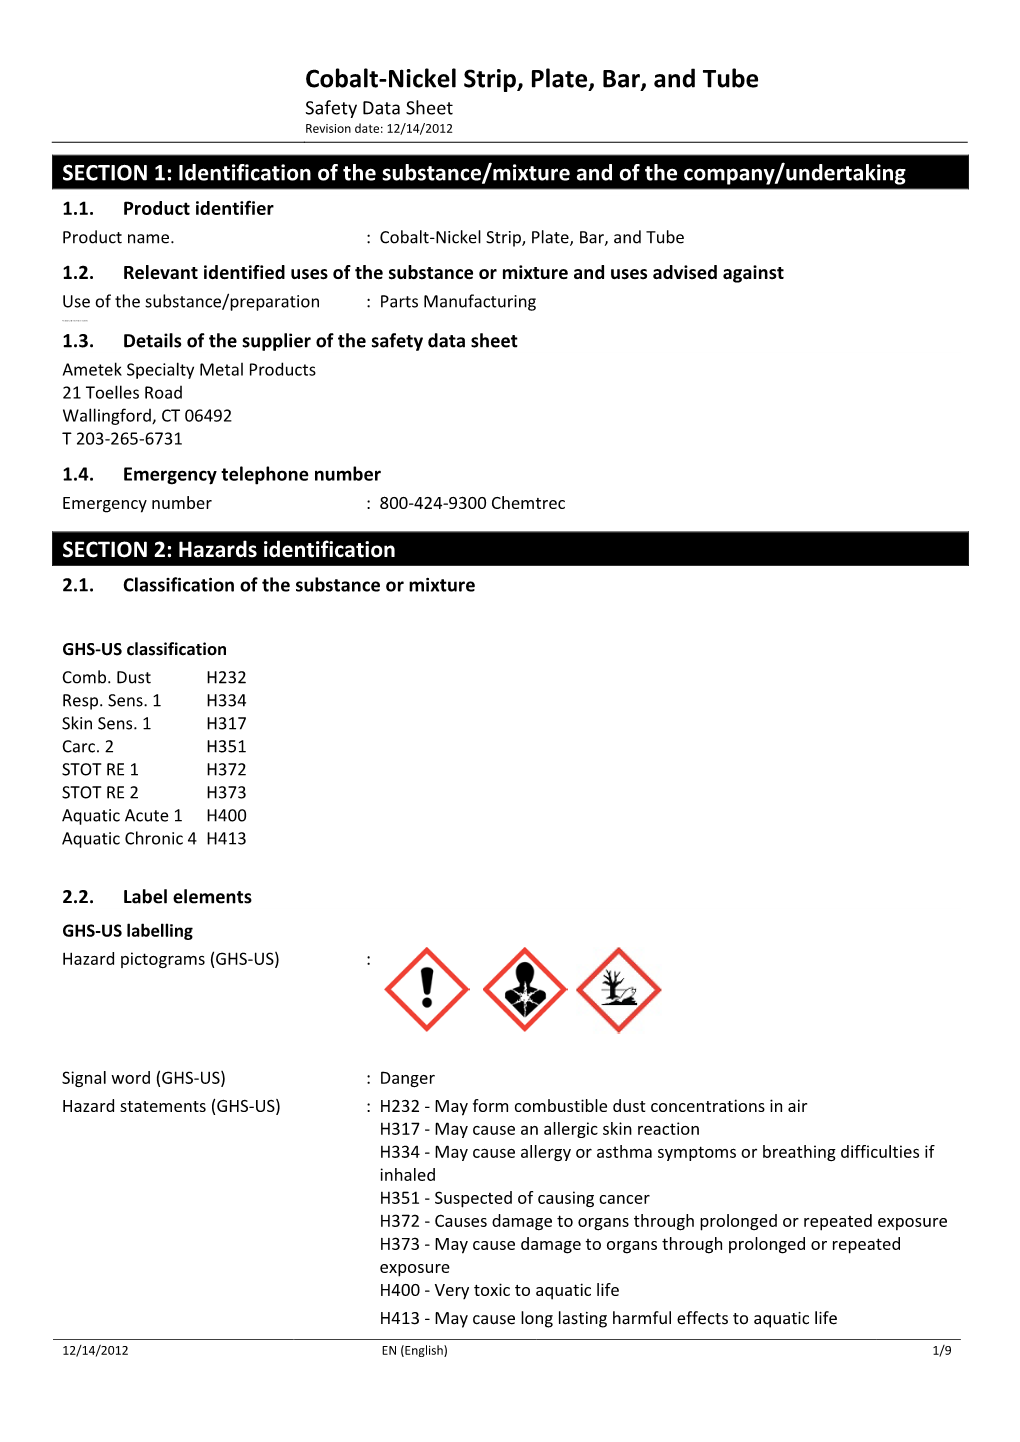 Cobalt-Nickel Strip, Plate, Bar, and Tube Safety Data Sheet Revision Date: 12/14/2012